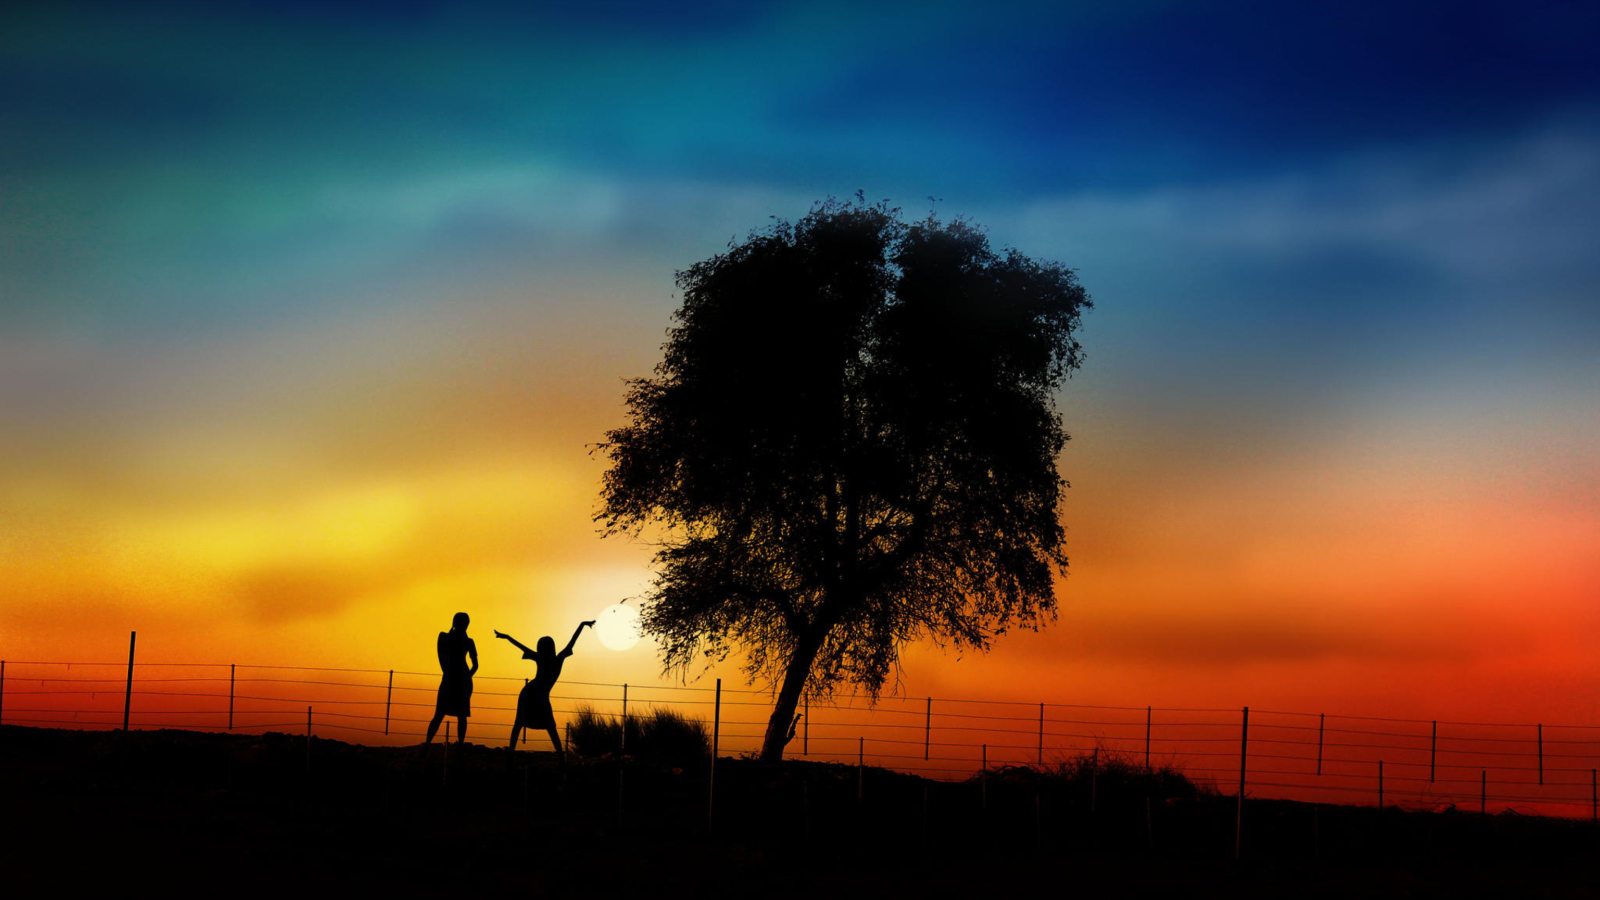 Das Couple Silhouettes Under Tree At Sunset Wallpaper 1600x900